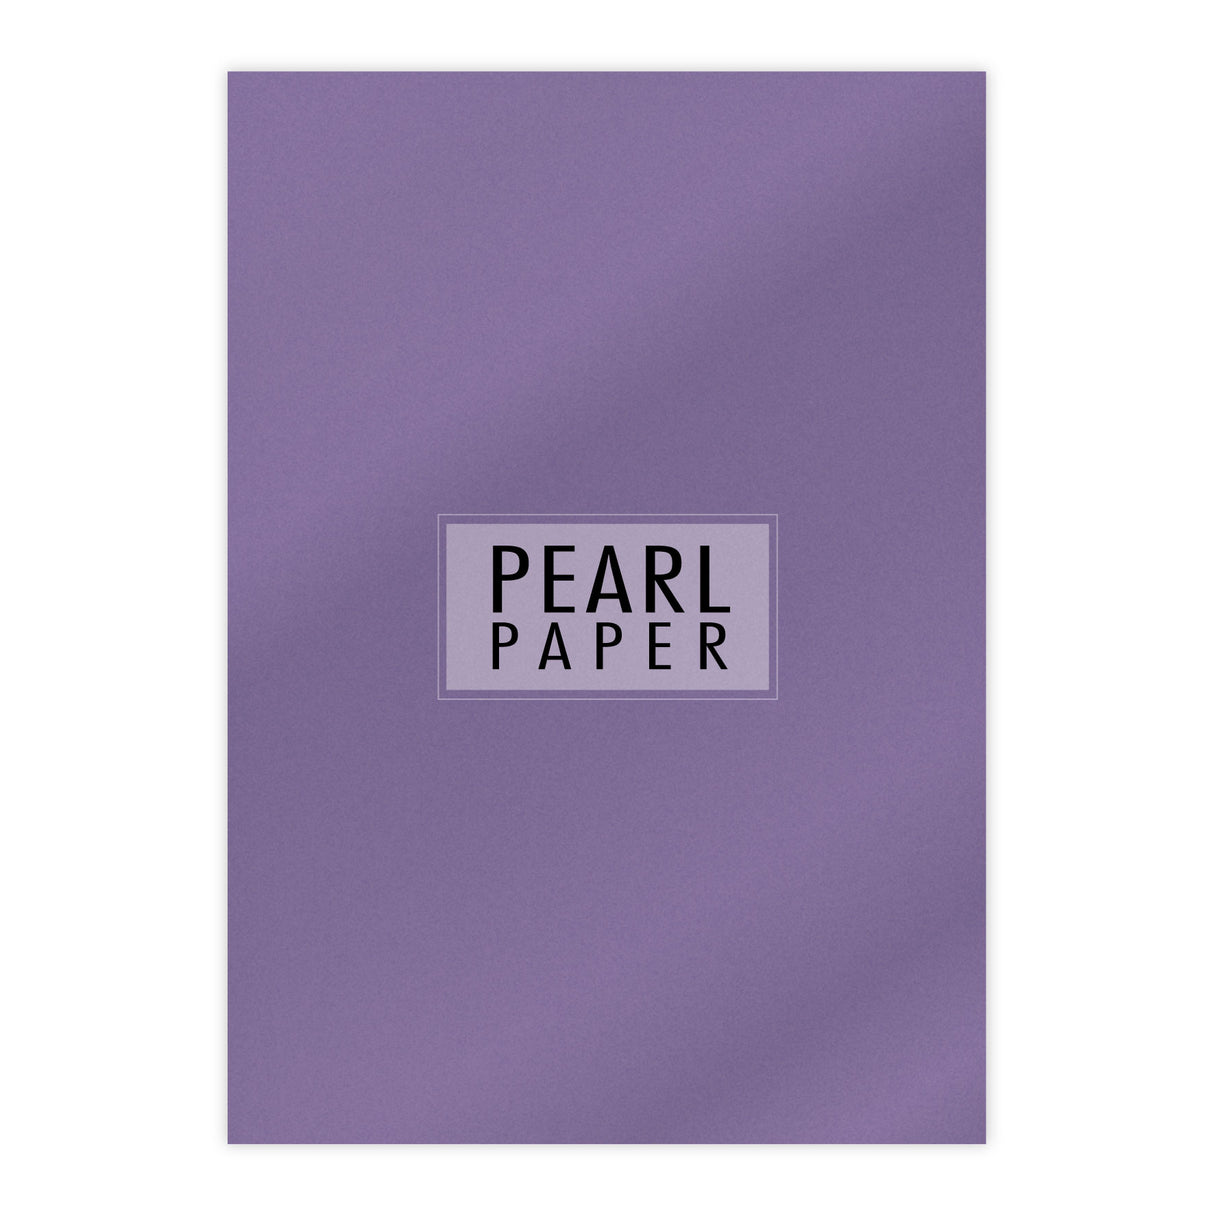 Chloes A4 Luxury Pearl Paper 10 Sheets Amethyst